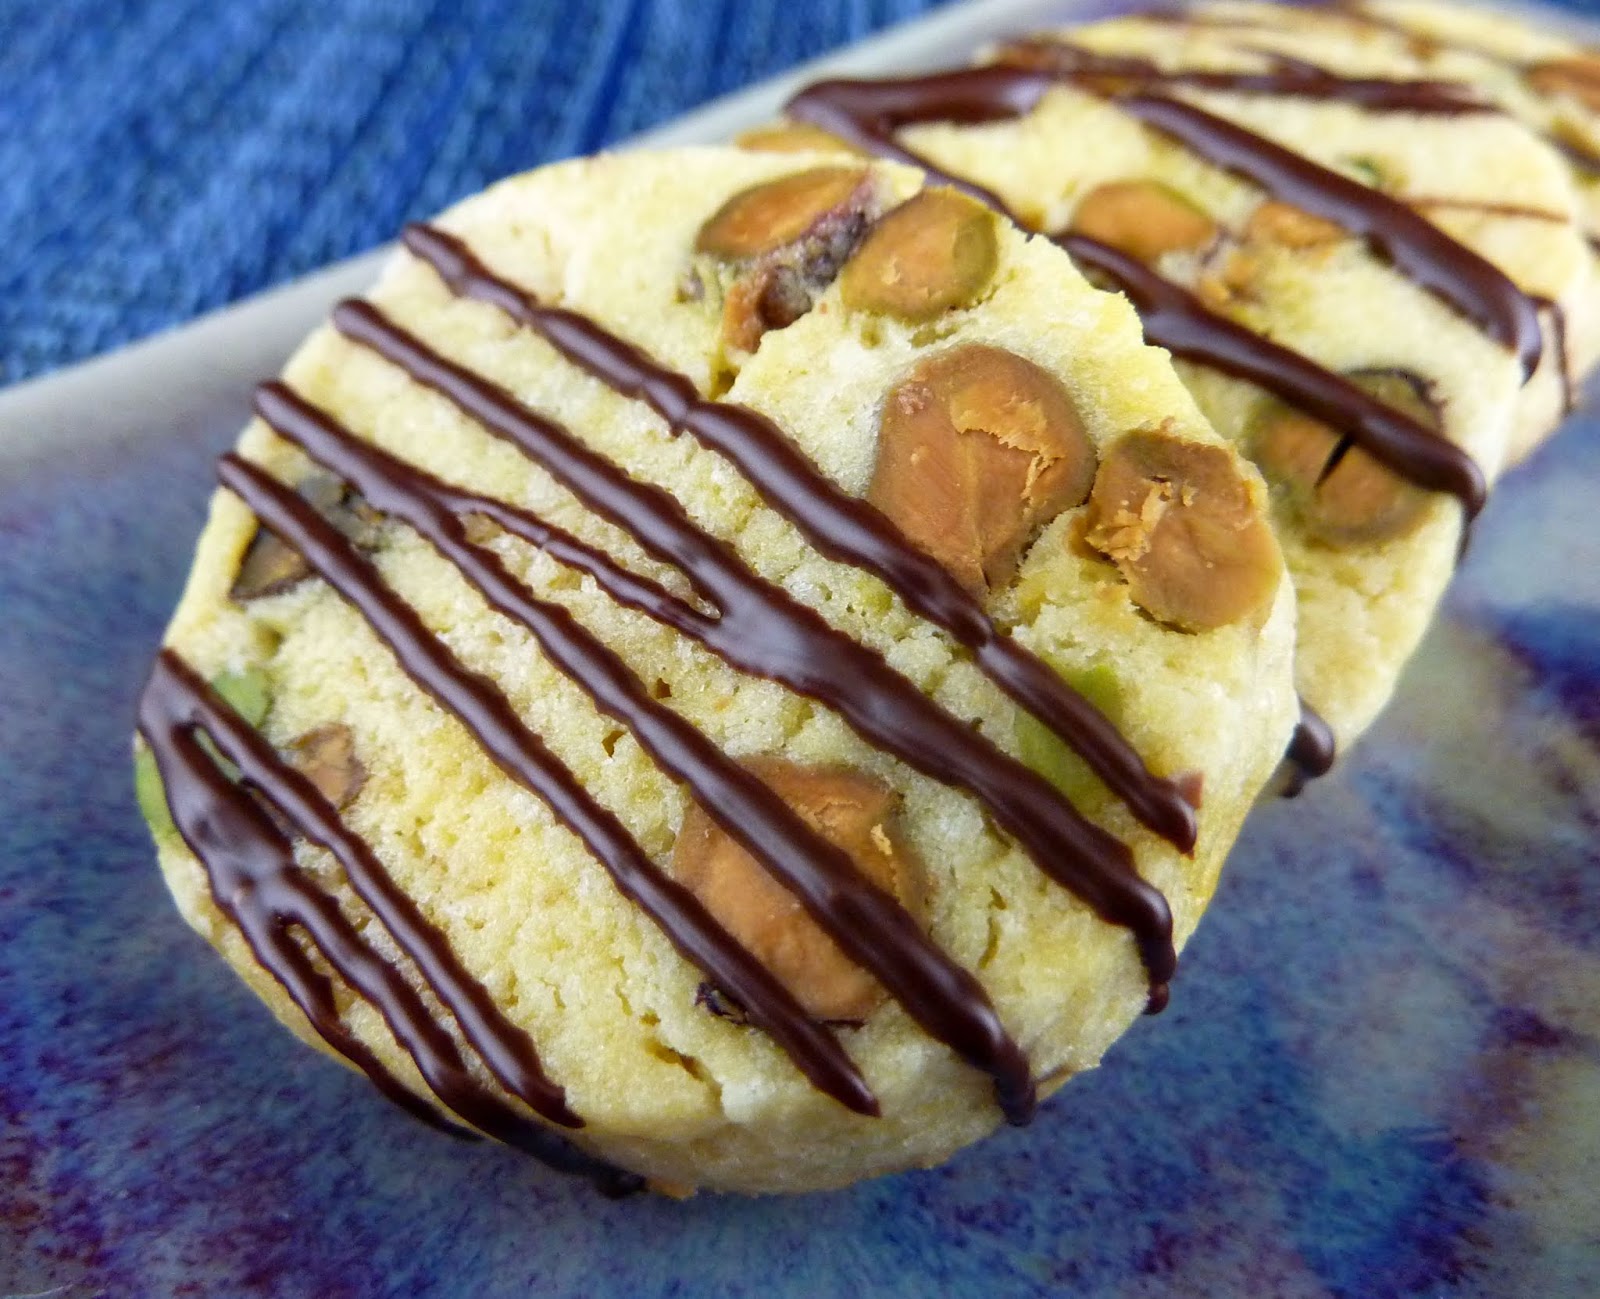 Cookies on Friday: Pistachio Slice and Bake Cookies